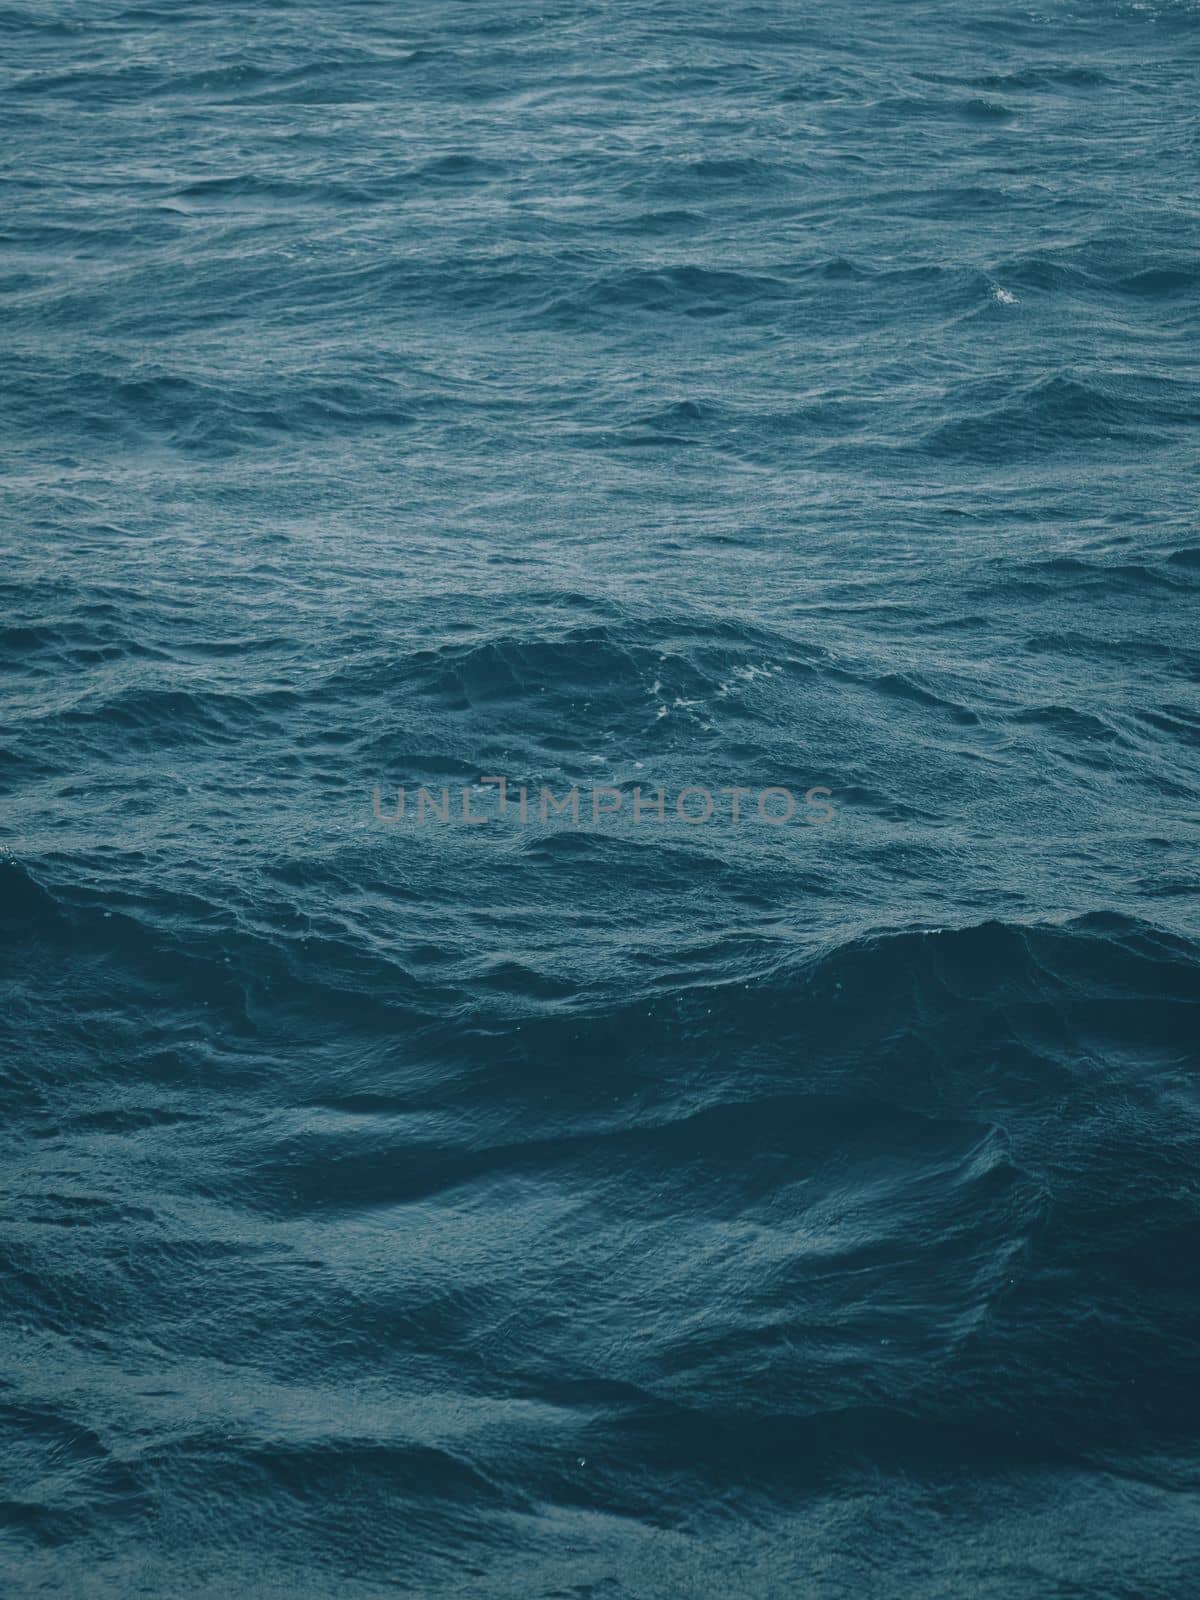 Dark blue-green color of water surface with waves in middle of endless deep sea. Endless wavy expanse of blue sea water. Dark blue waves in deep ocean. Raging aquamarine waves on surface of the water